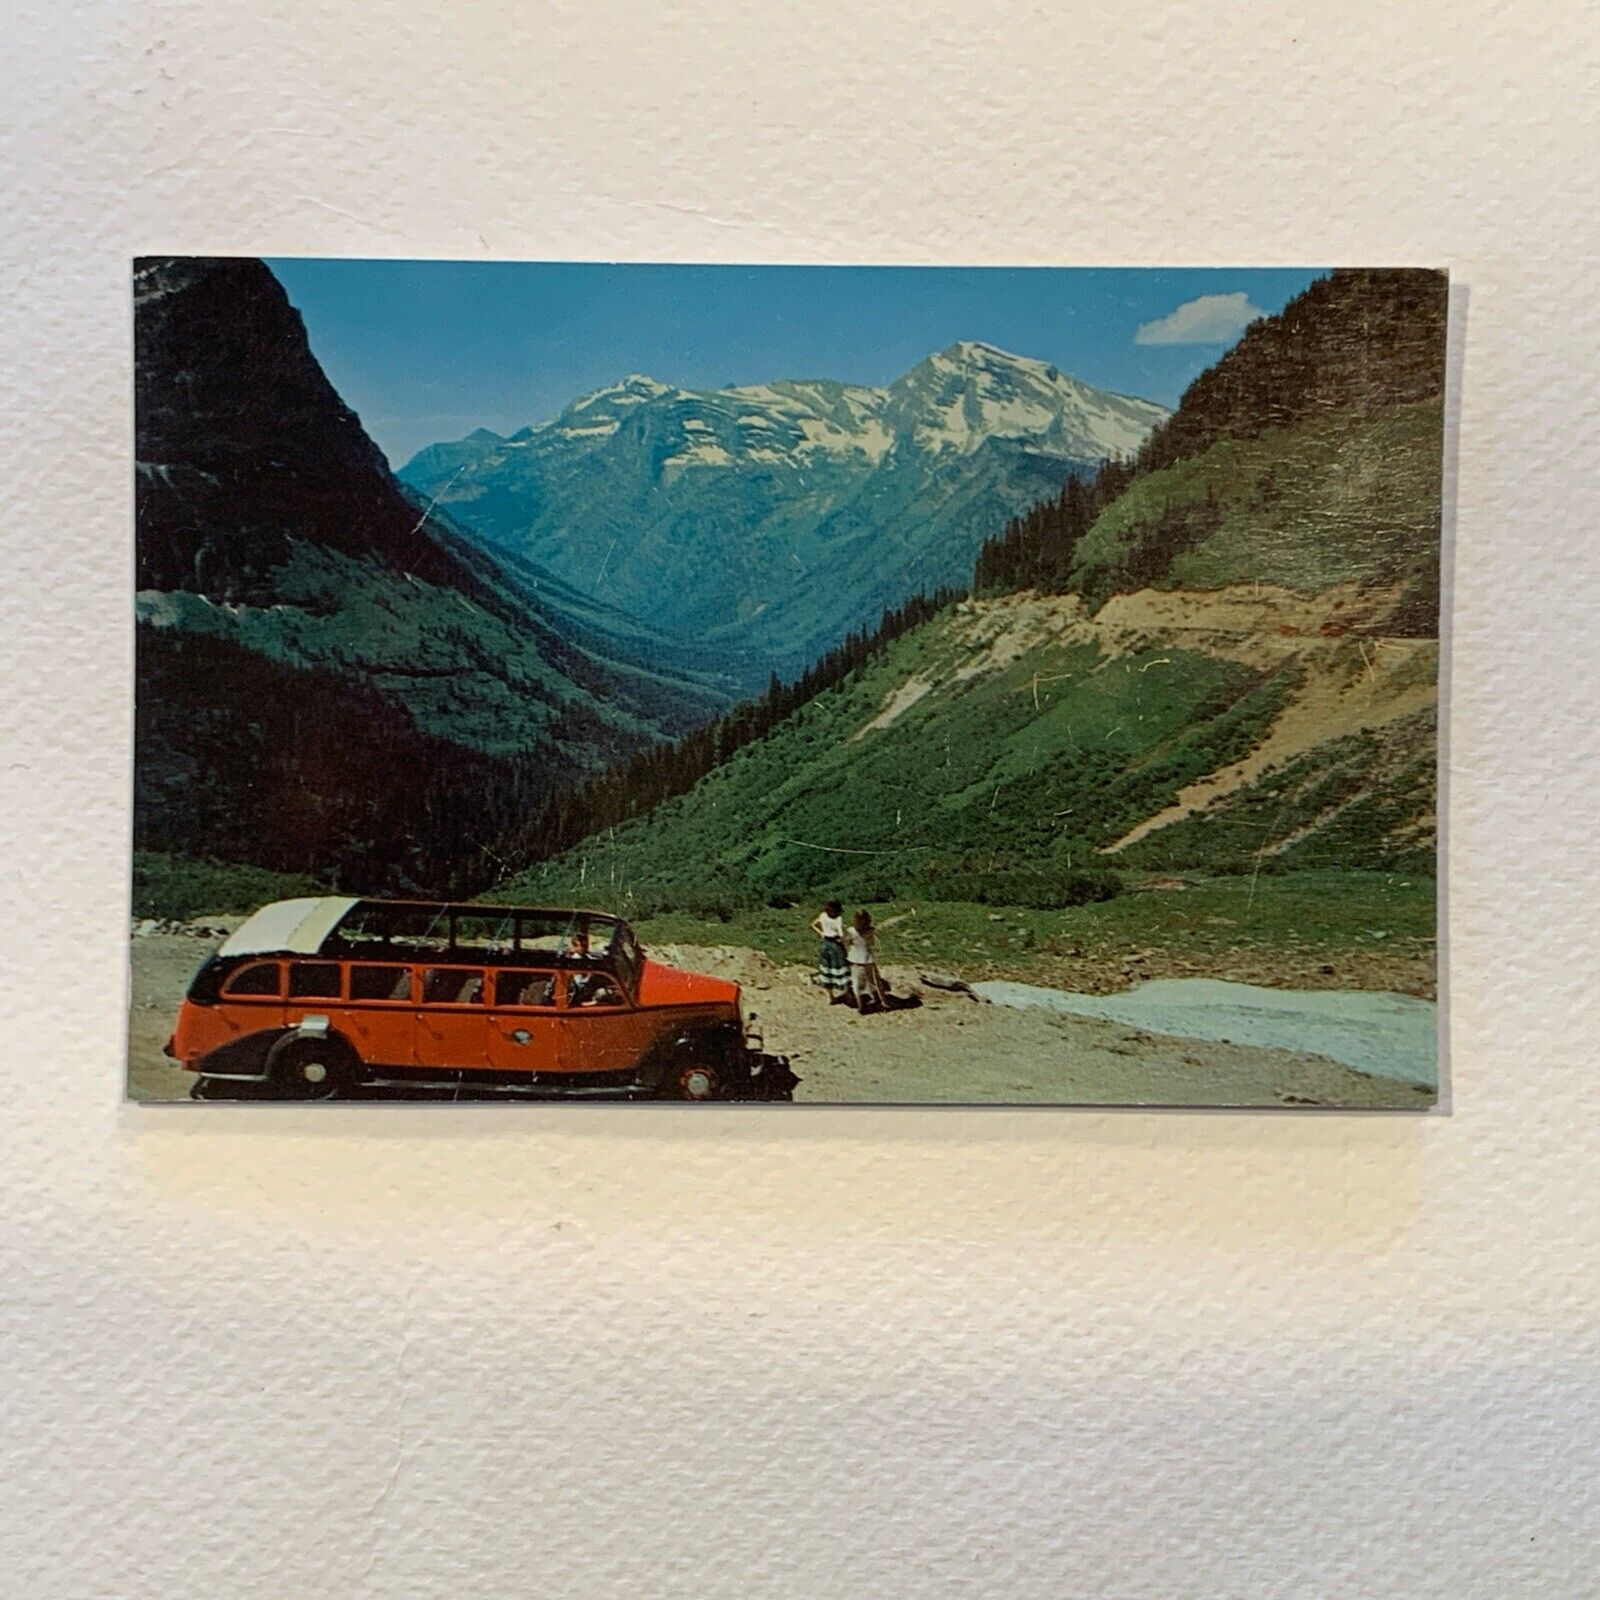 Going to the Sun Road Glacier National Park - Logan Pass Red Bus - Postcard MT